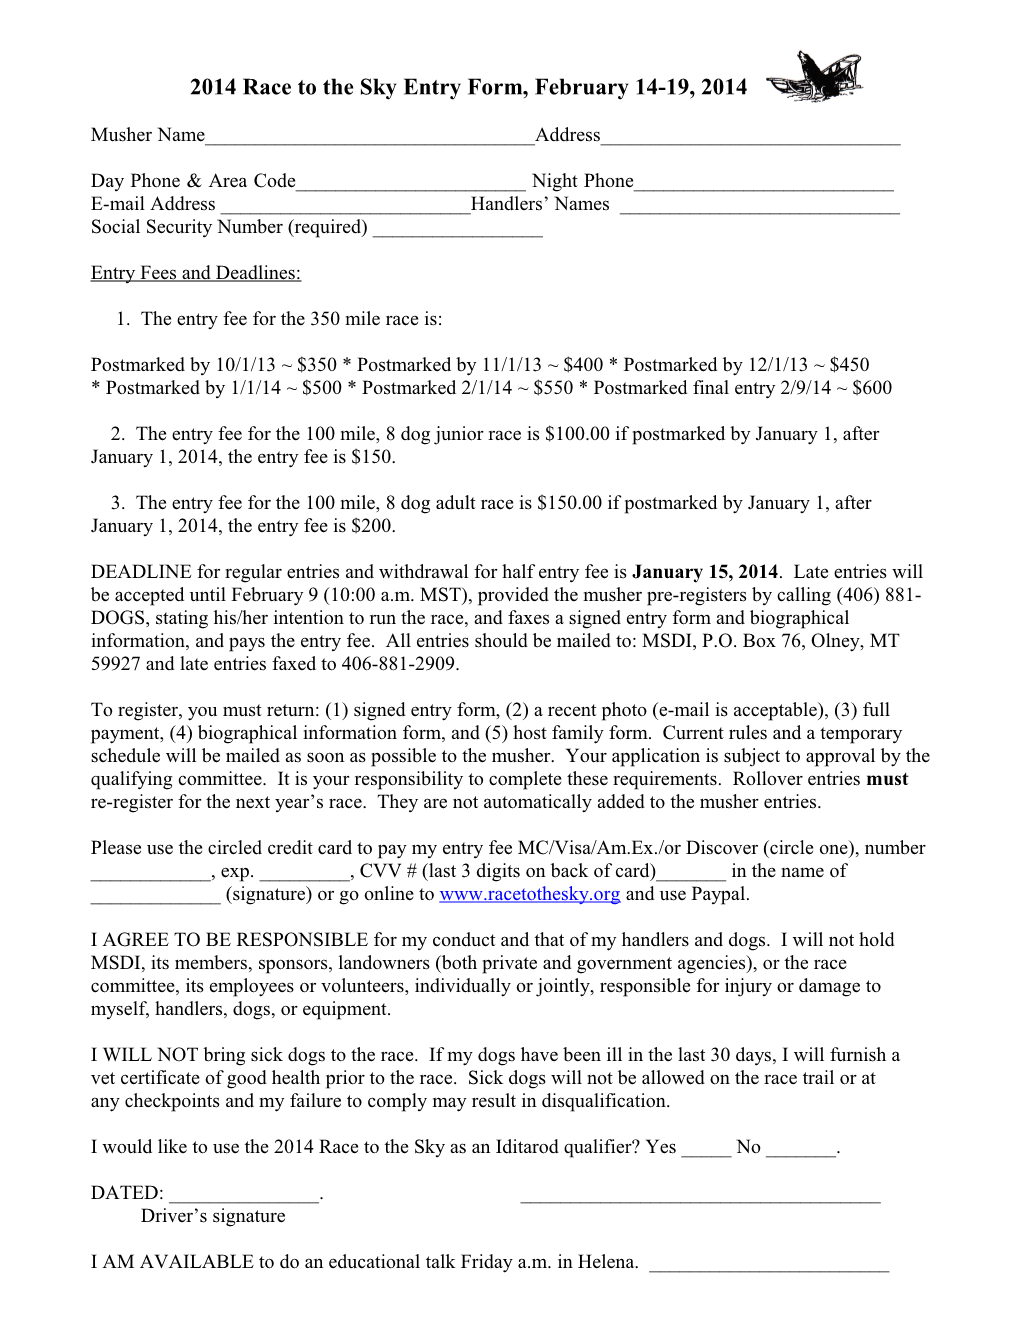 2006 Race to the Sky Entry Form